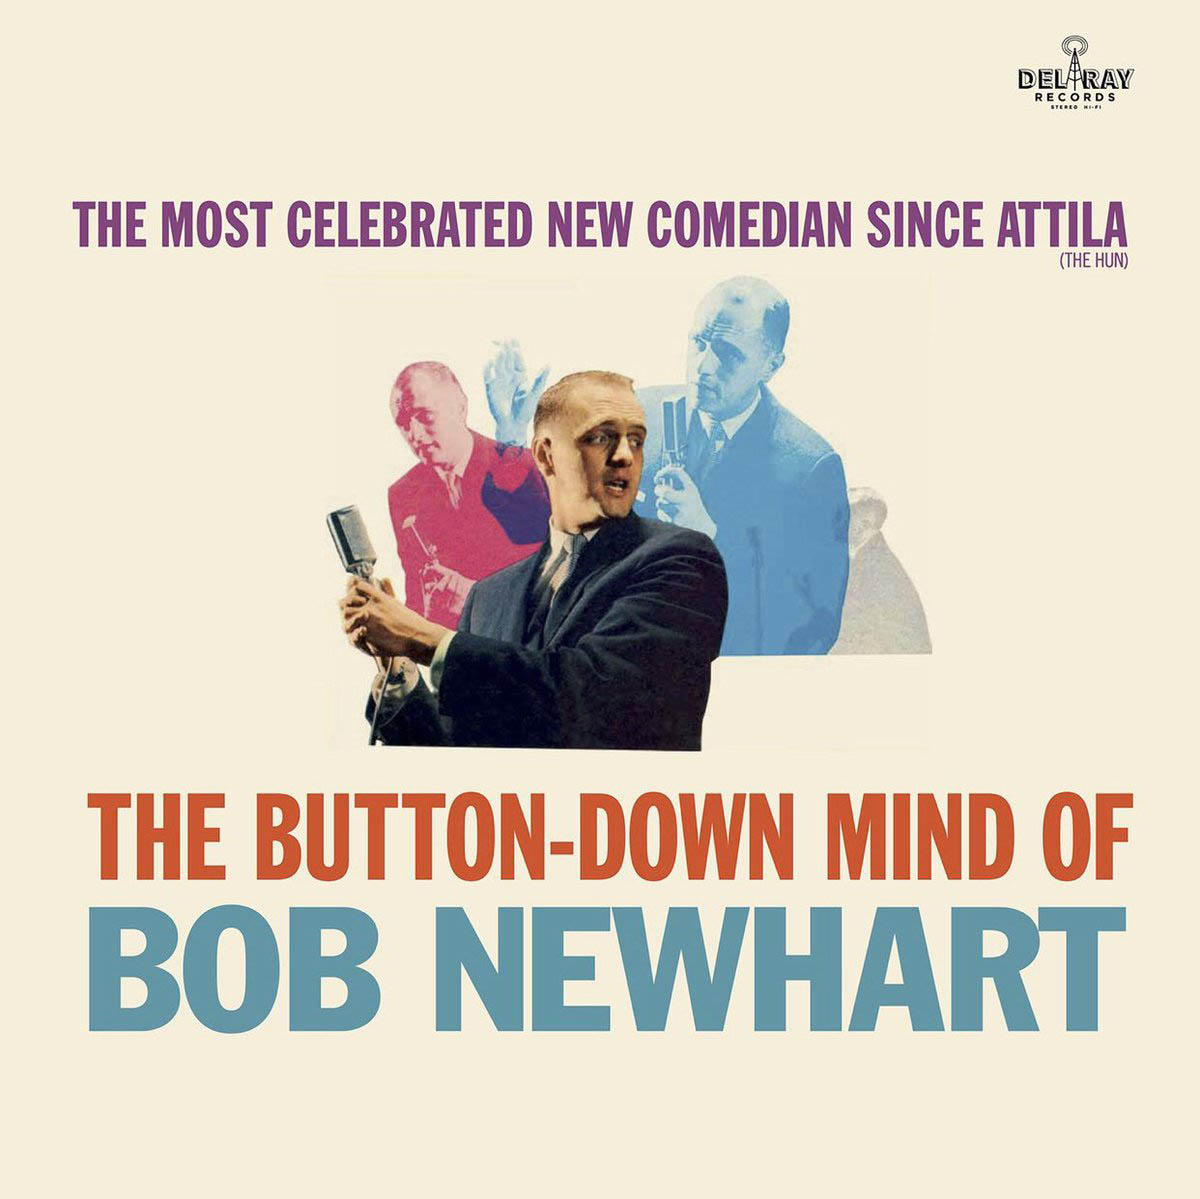 The Button Down Mind Of Bob Newhart" Albumcover (1960)